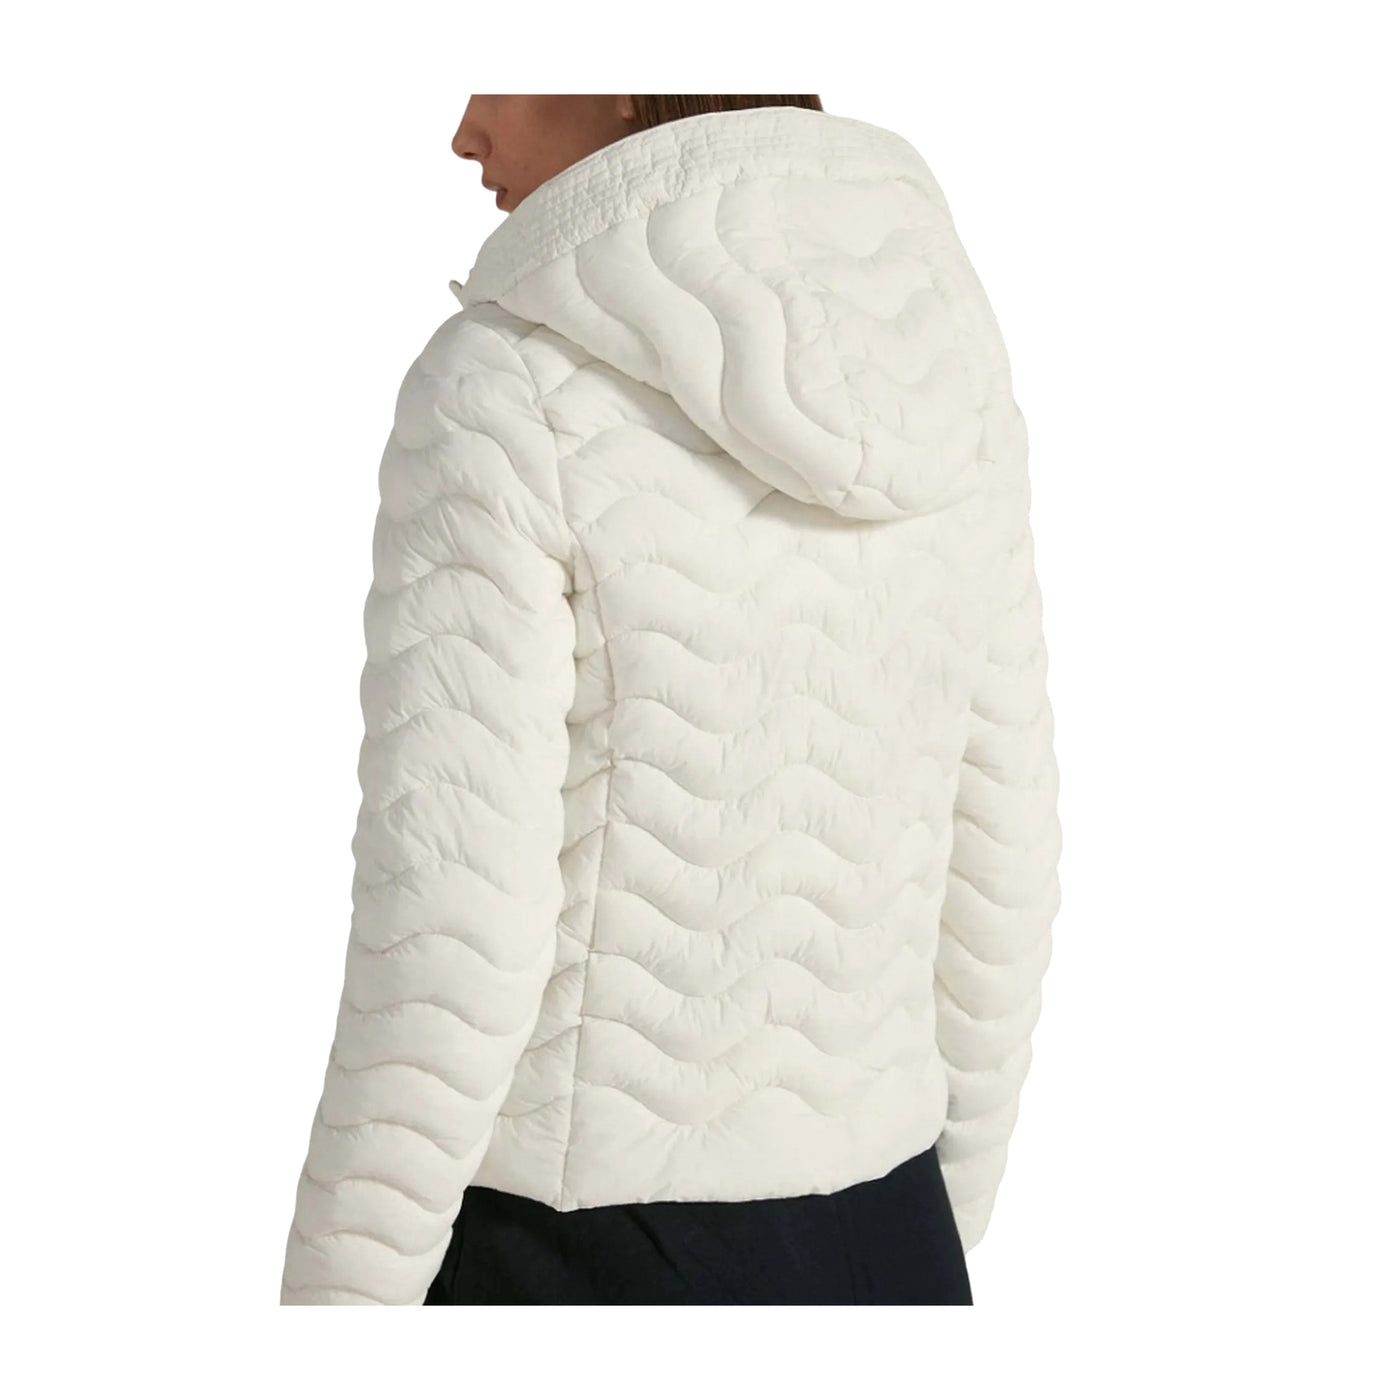 Women's jacket with wave quilt